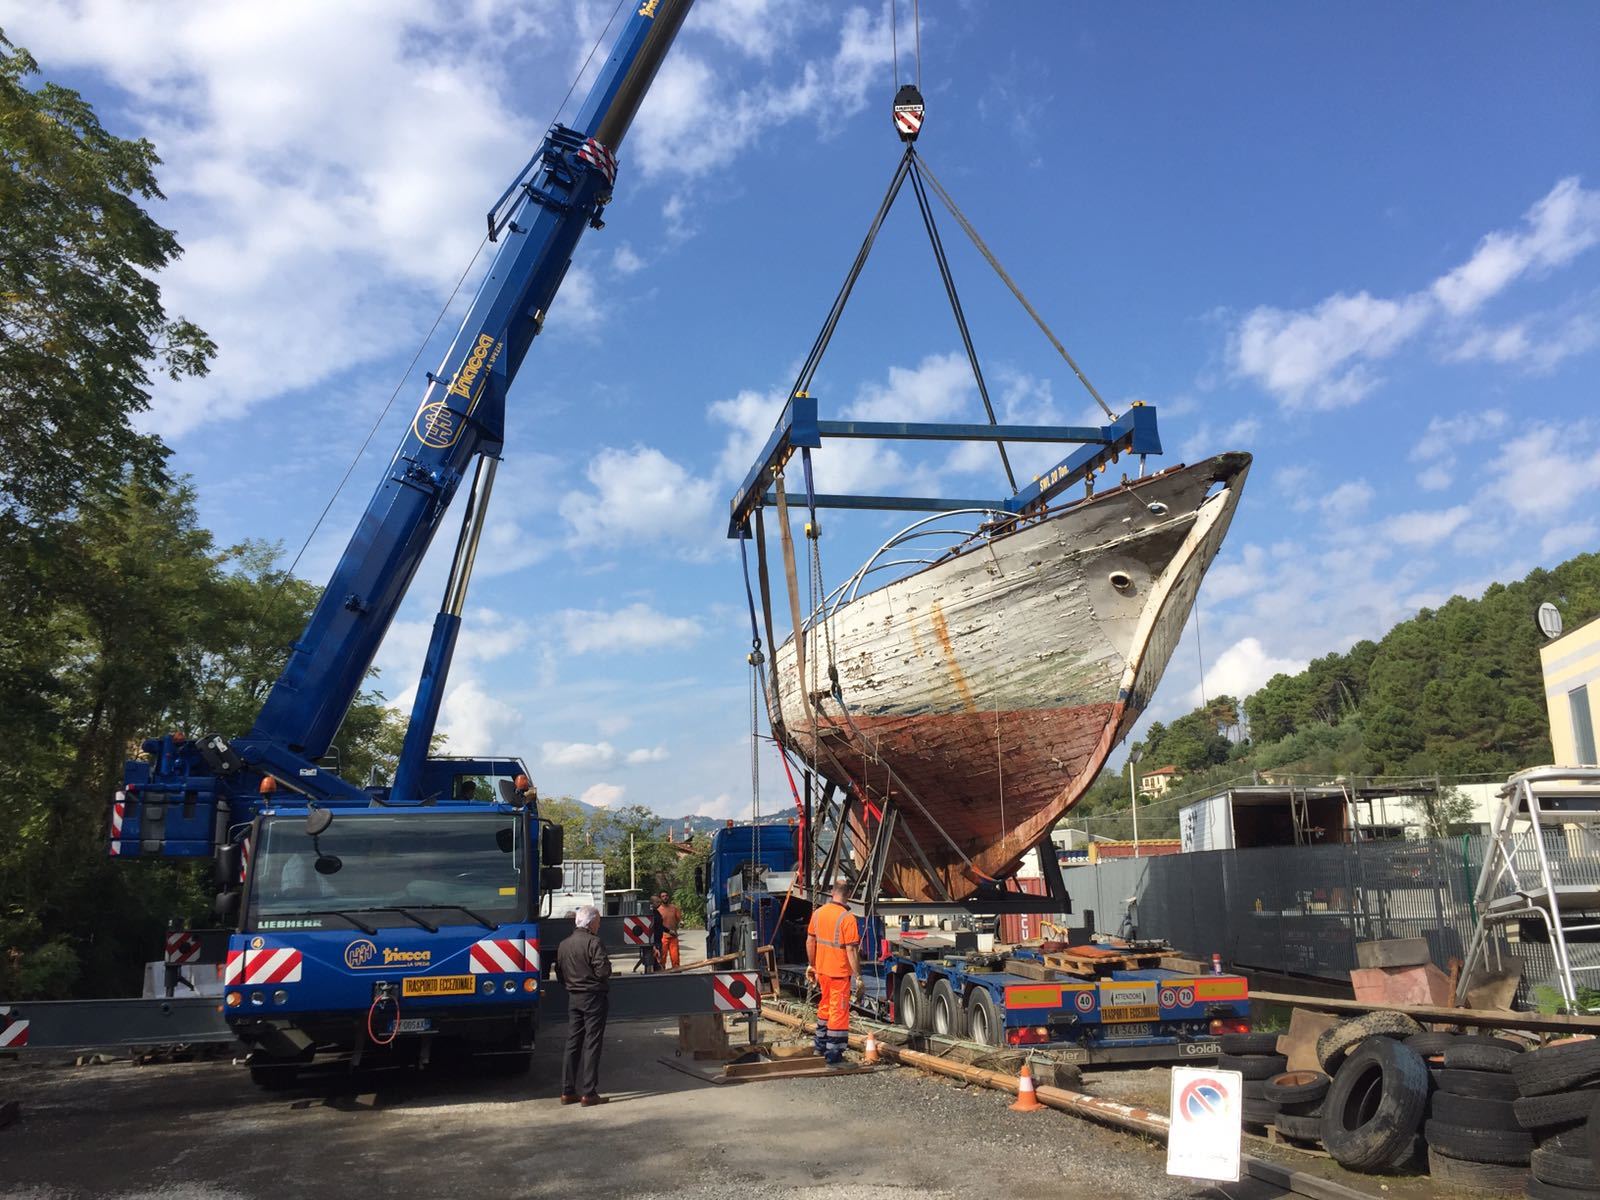 articulated lorry for boat lifting